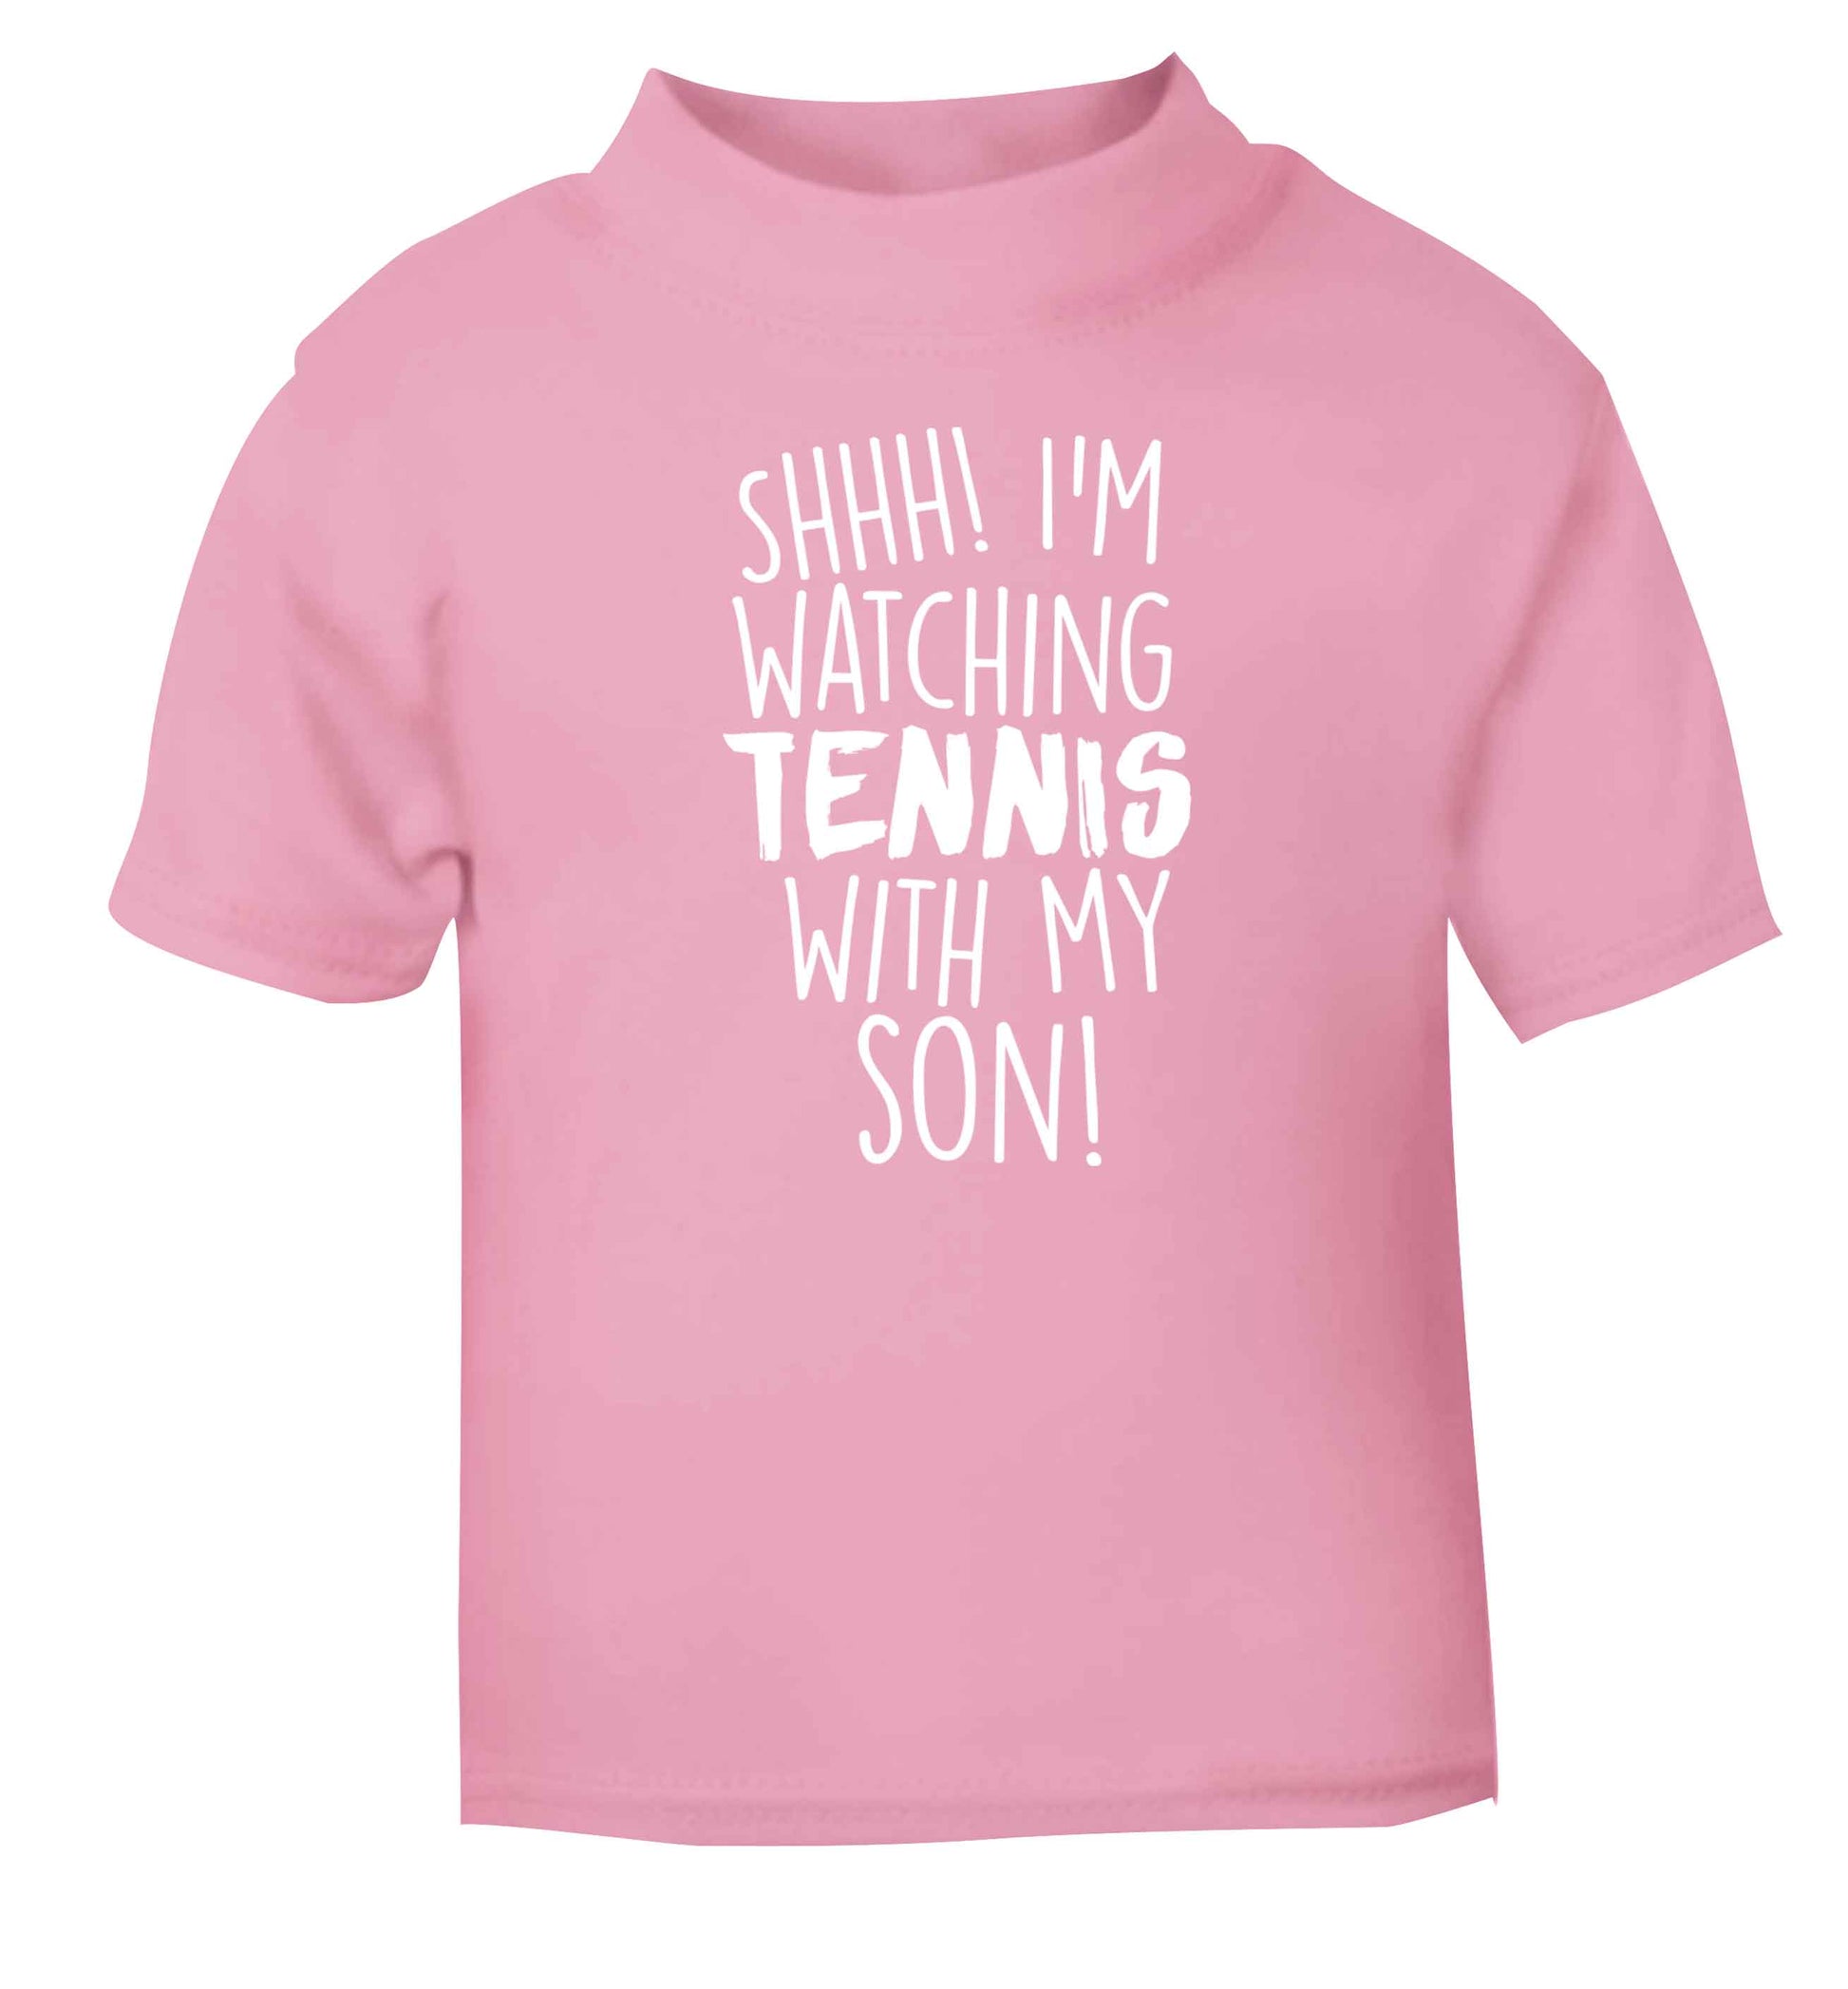 Shh! I'm watching tennis with my son! light pink Baby Toddler Tshirt 2 Years